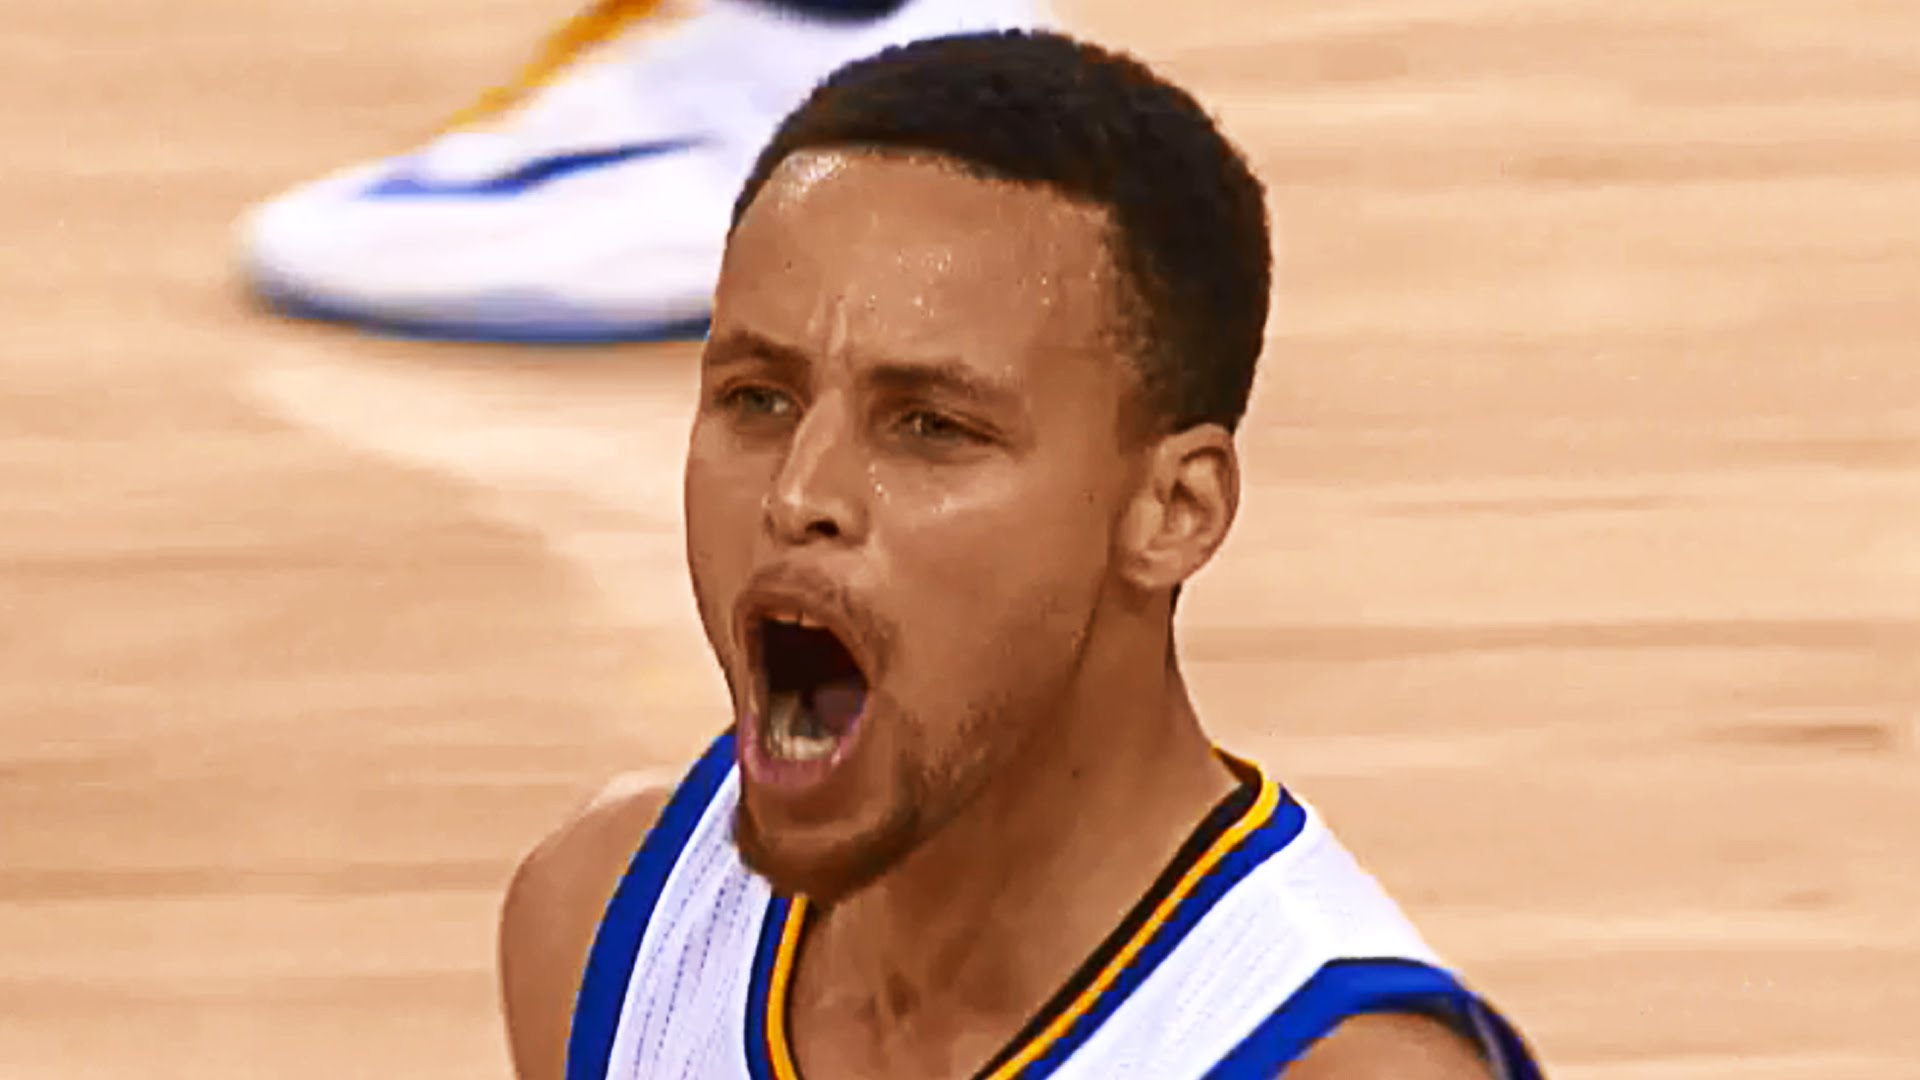 Stephen Curry tells the Oakland crowd 